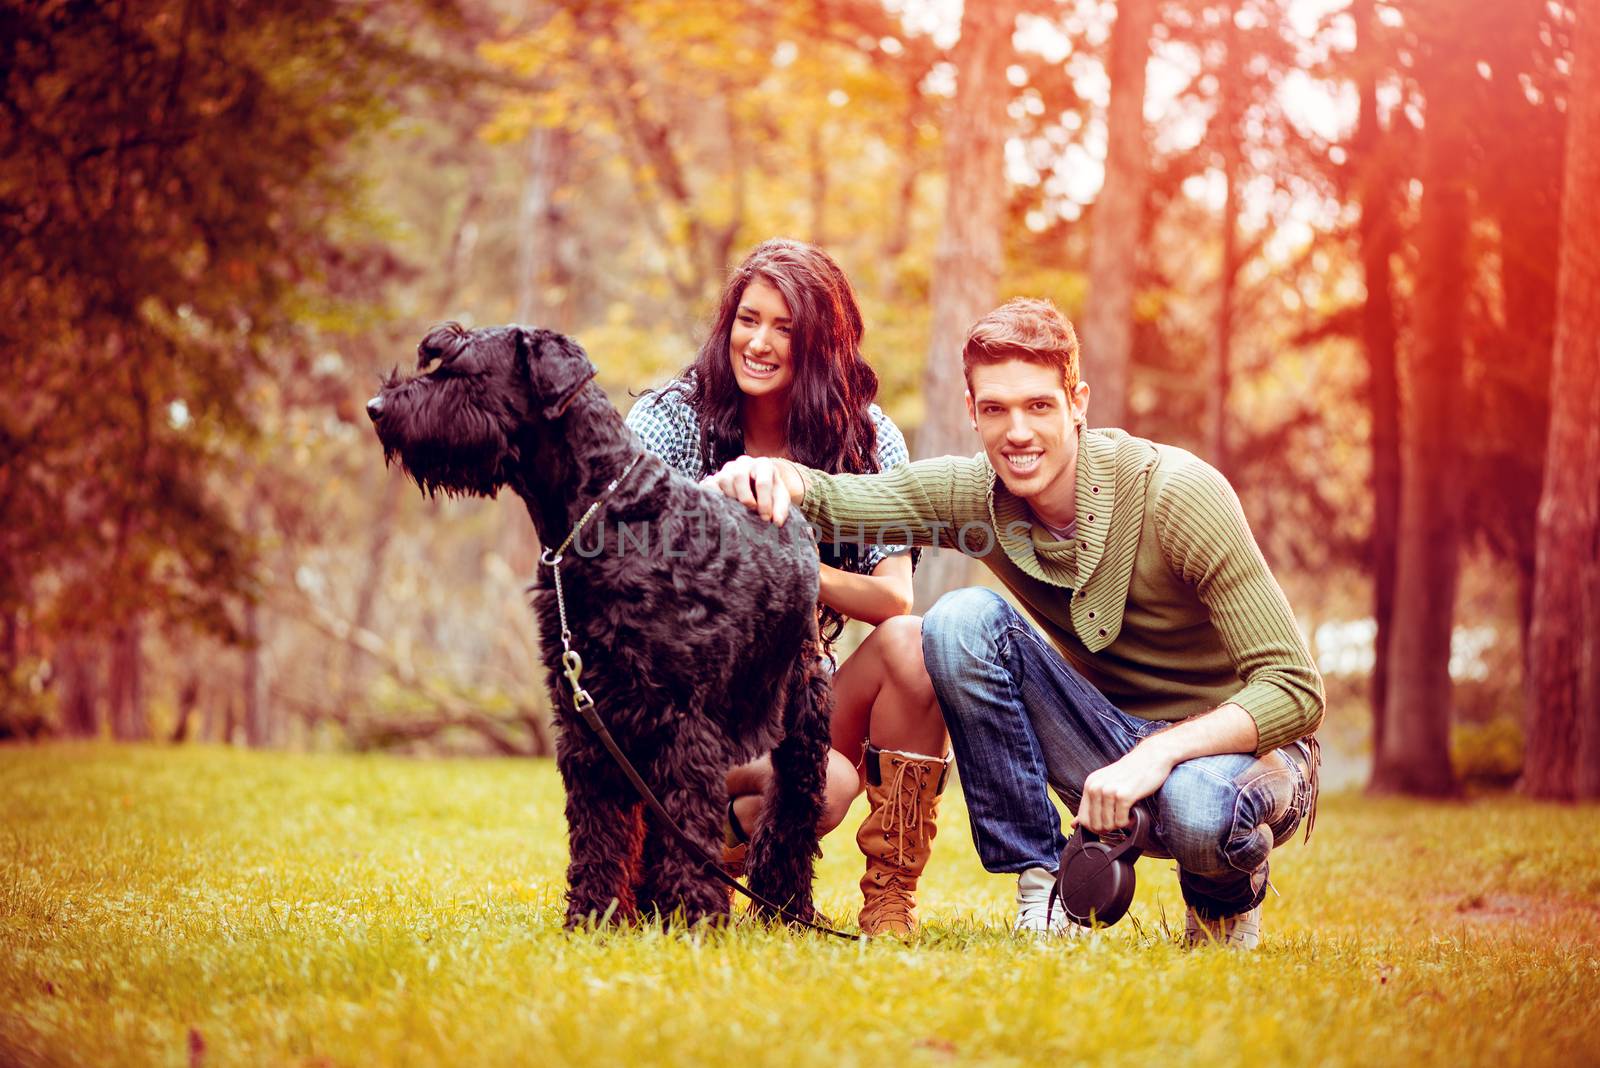 Beautiful lovely couple with a dog, a black giant schnauzer, enjoying in the park in autumn colors.